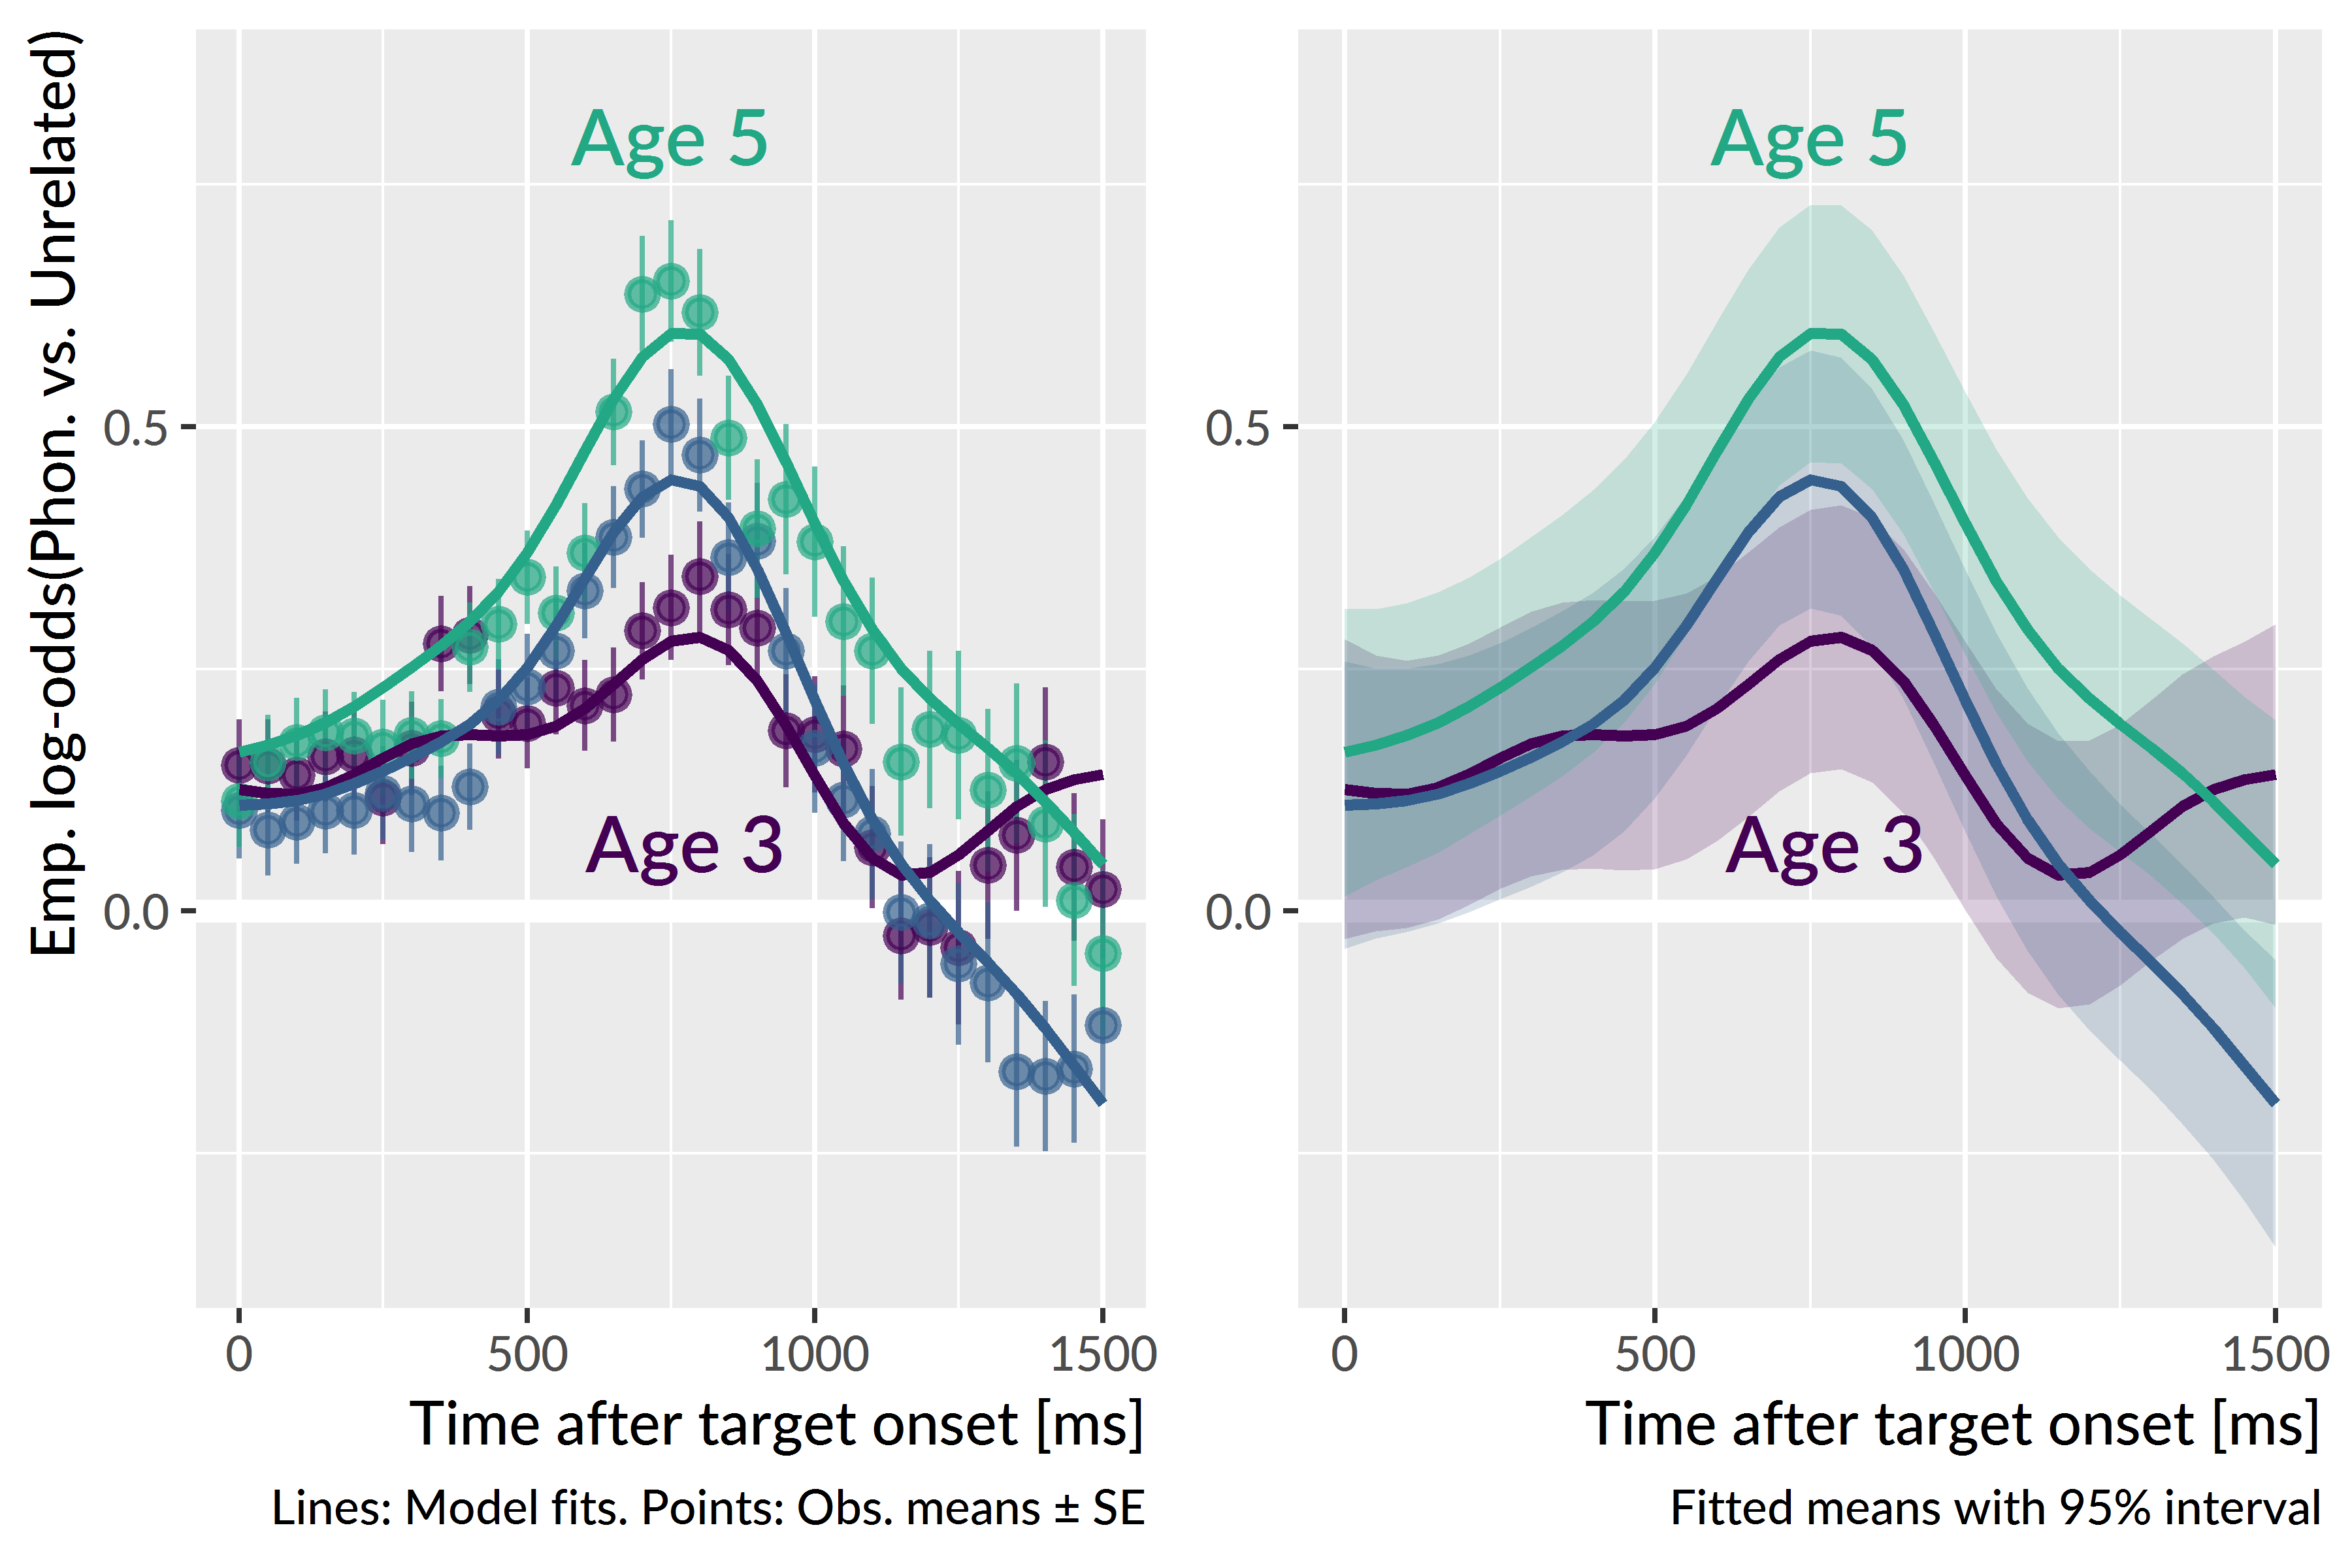 With each year of the study, children looked more to the phonological competitor (relative to the unrelated image) during and after the target noun. Both figures show means for each year estimated by the generalized additive model. The left panel compares model estimates to observed means and standard errors, and the right panel visualizes estimated means and their 95% confidence intervals.